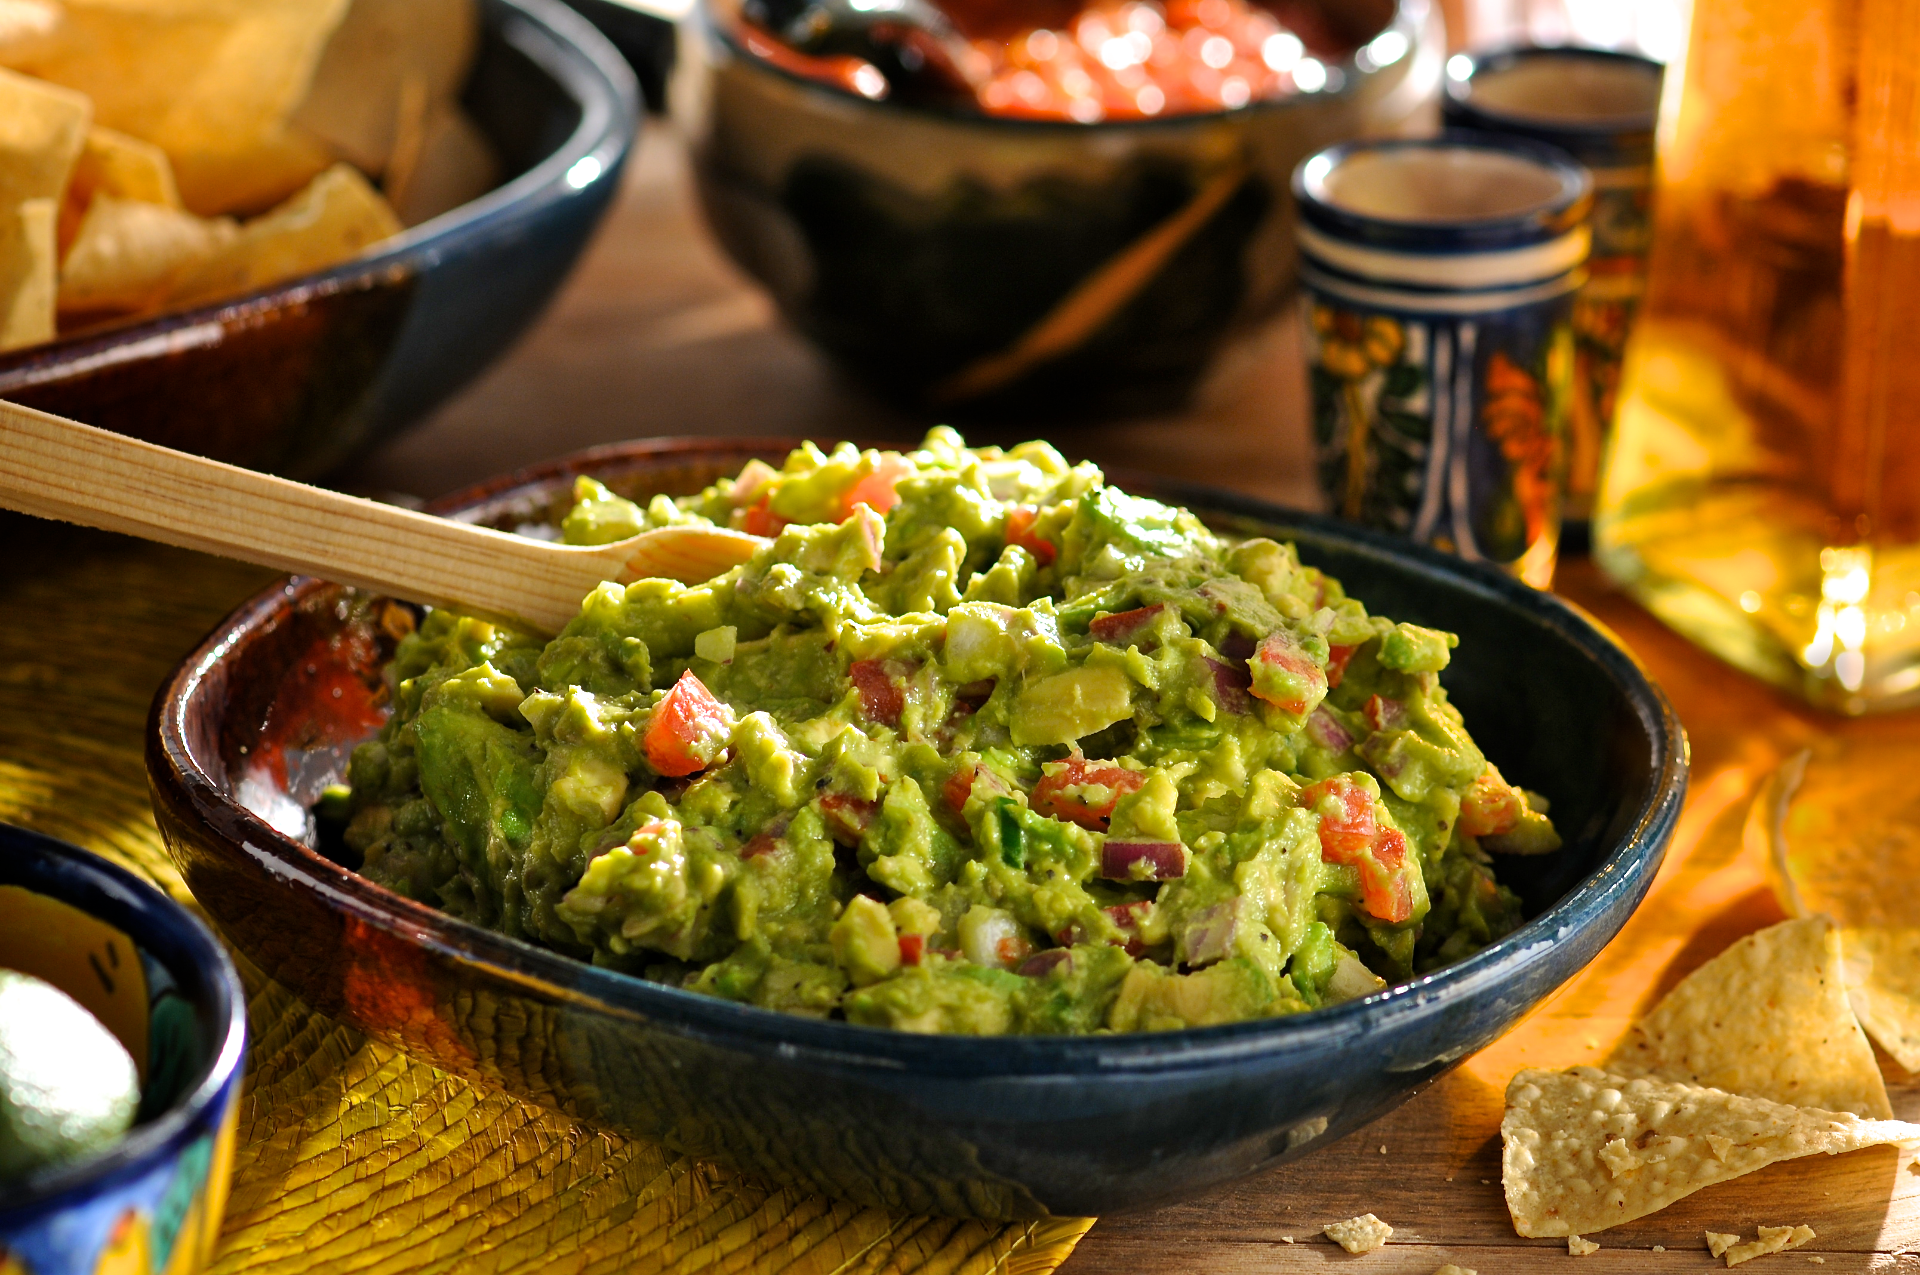 Freshly chopped avocado and diced ripe tomatoes make for an incredibly delicious and gorgeously green guacamole. Warm up some tortilla chips and dig in! Freshly-made guacamole really hits the spot, served with crisp chips and an ice-cold Margarita.